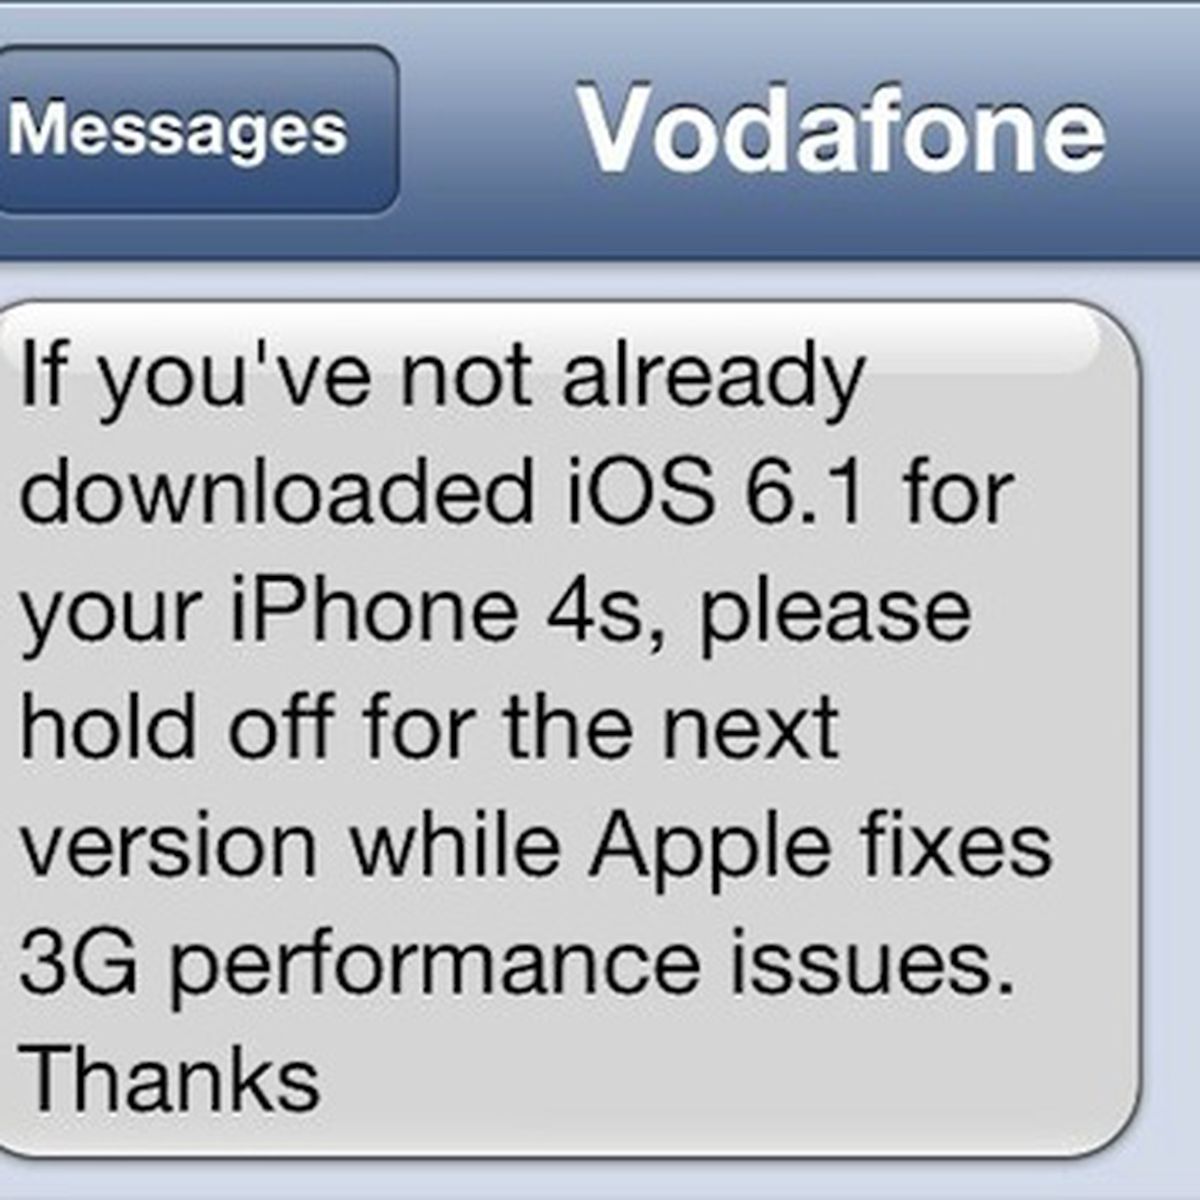 elke dag pijn effect Vodafone UK Warning iPhone 4S Users Not to Upgrade to iOS 6.1 Due to 3G  Issues - MacRumors